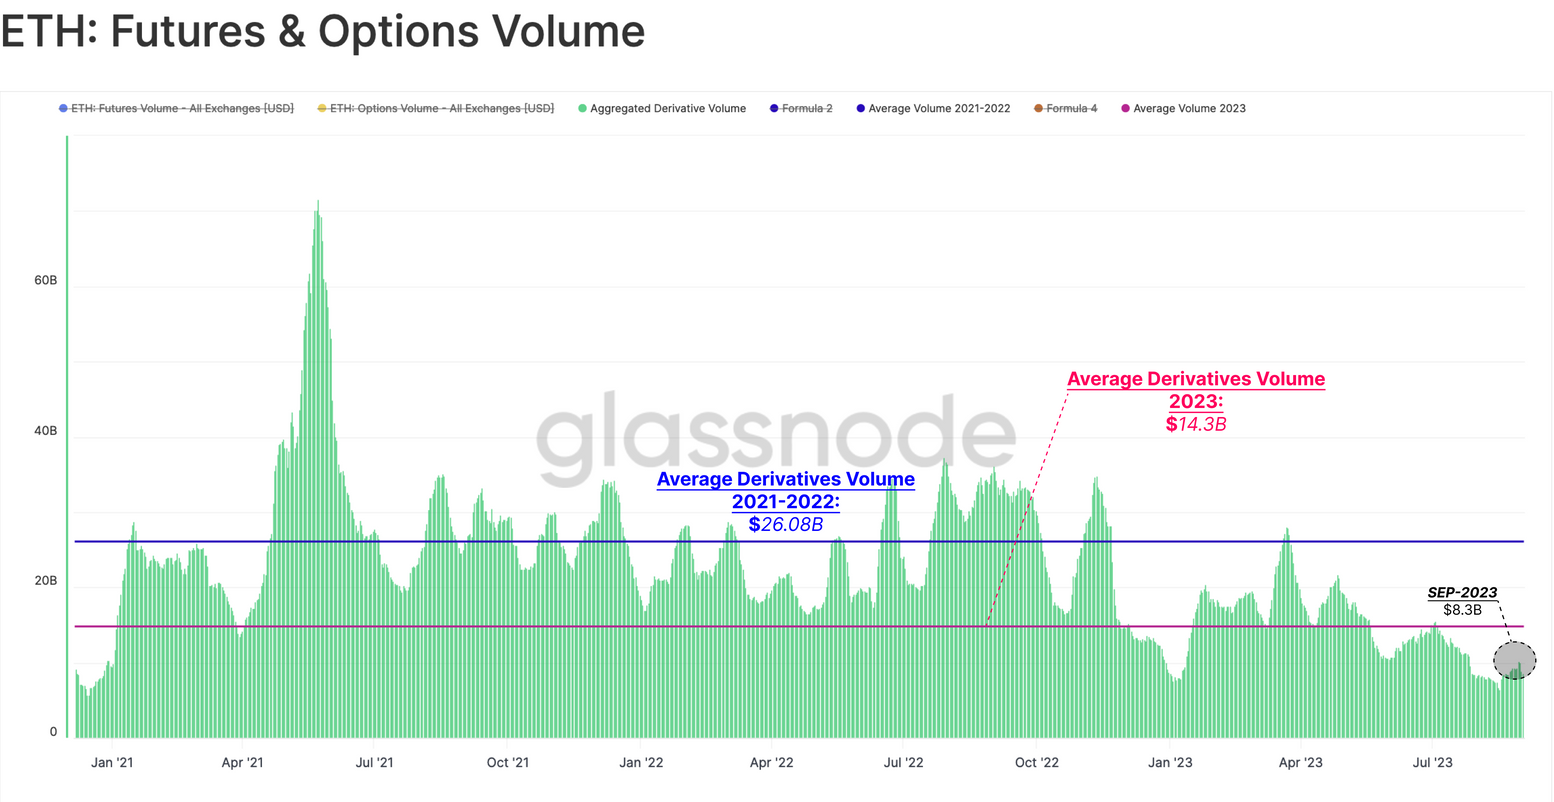 The volume of derivative contracts related to Ether as reported by Glassnode.